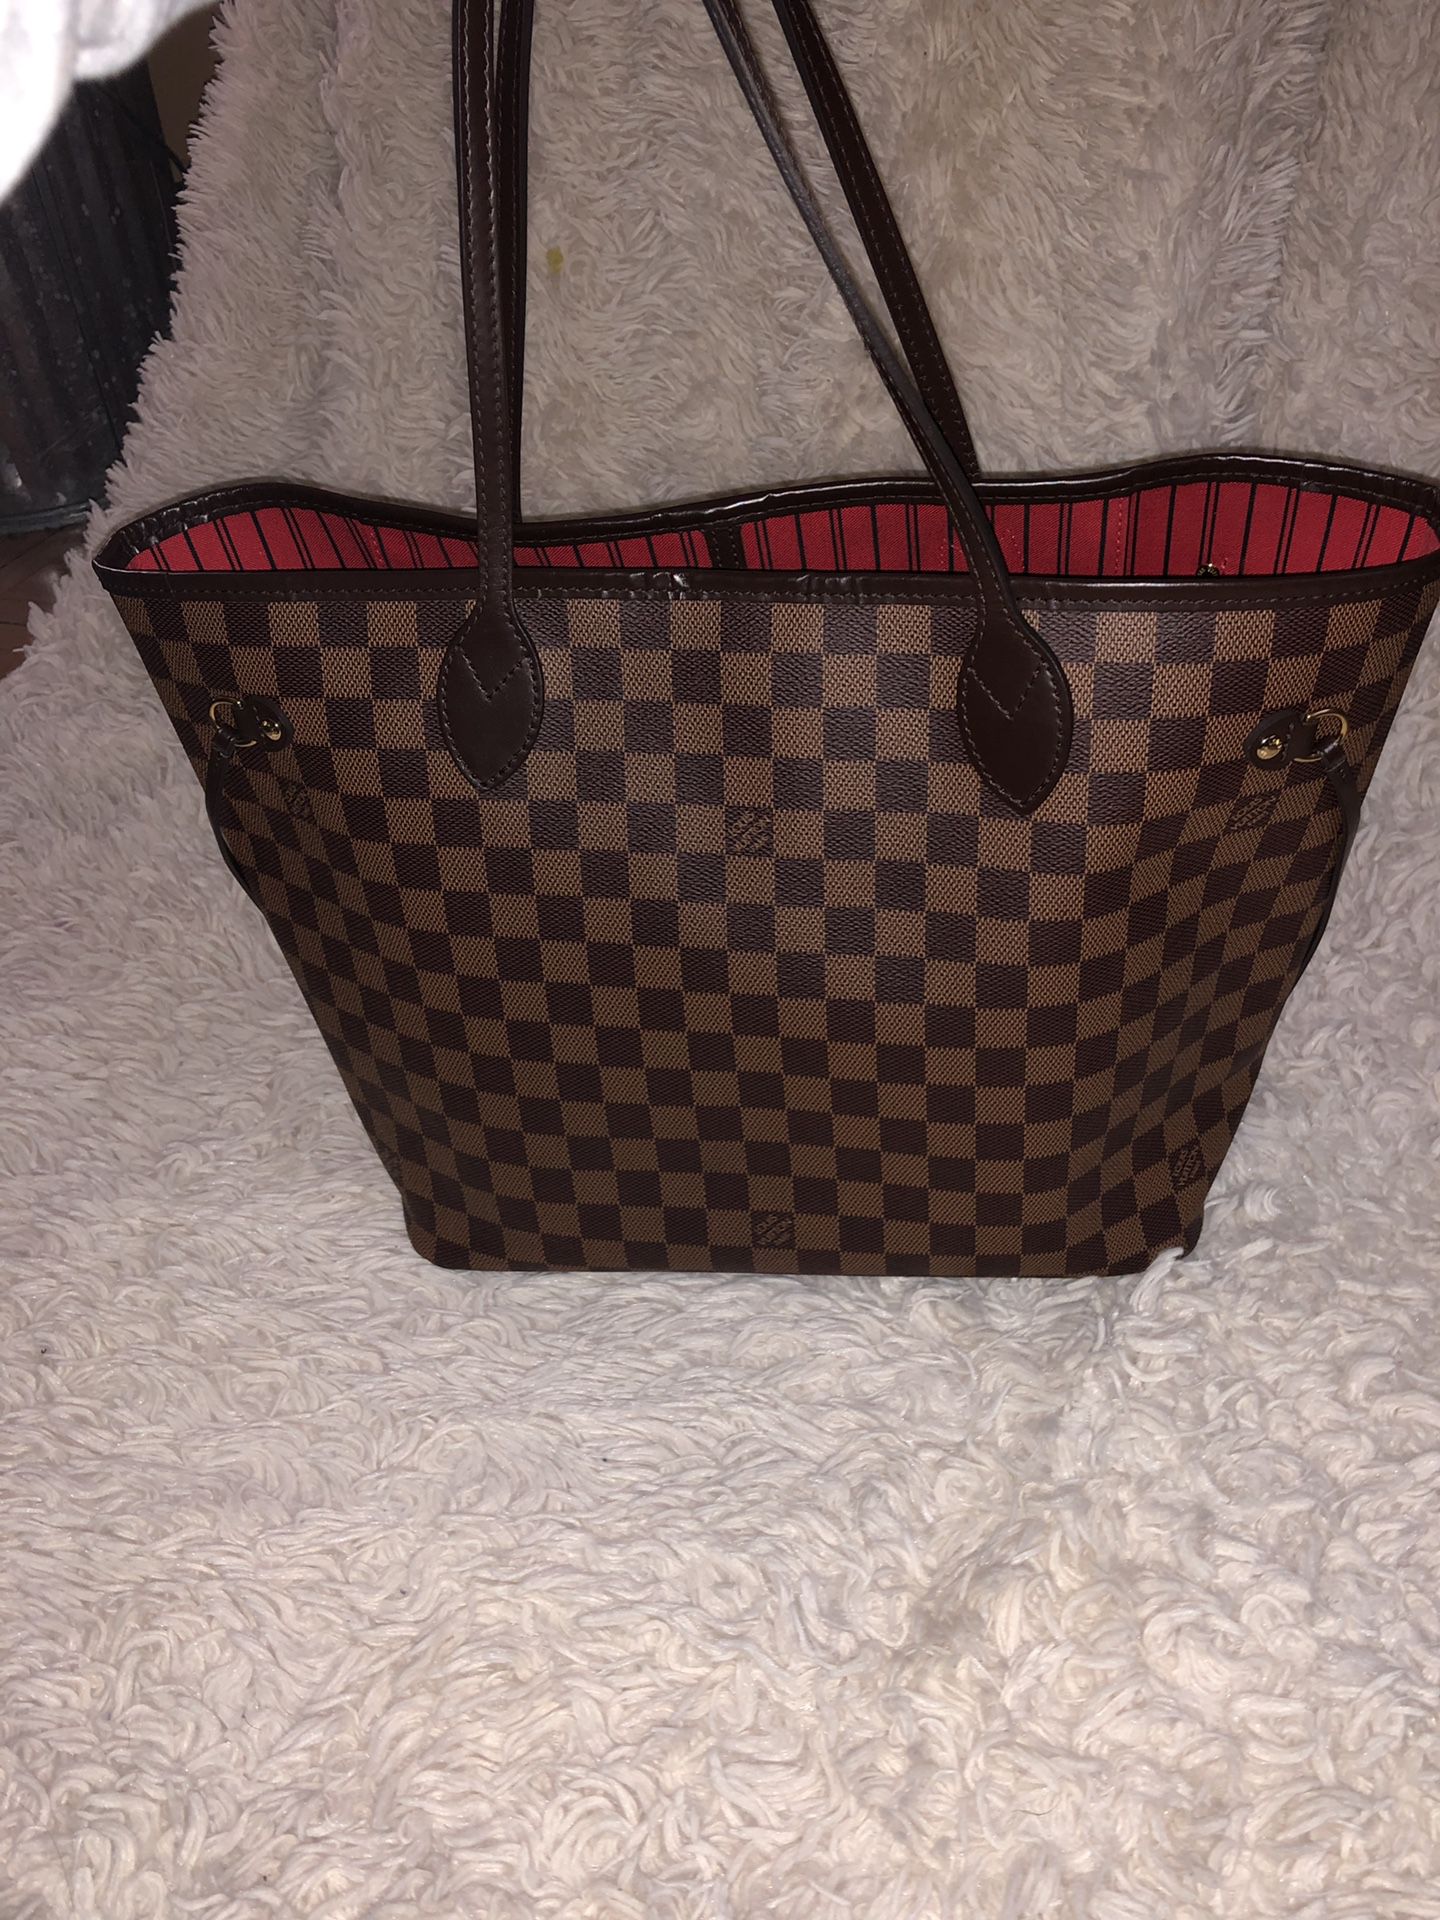 Louis Vuitton Neverfull MM & Bag Insert Organizer. Comes with dust bag and box.